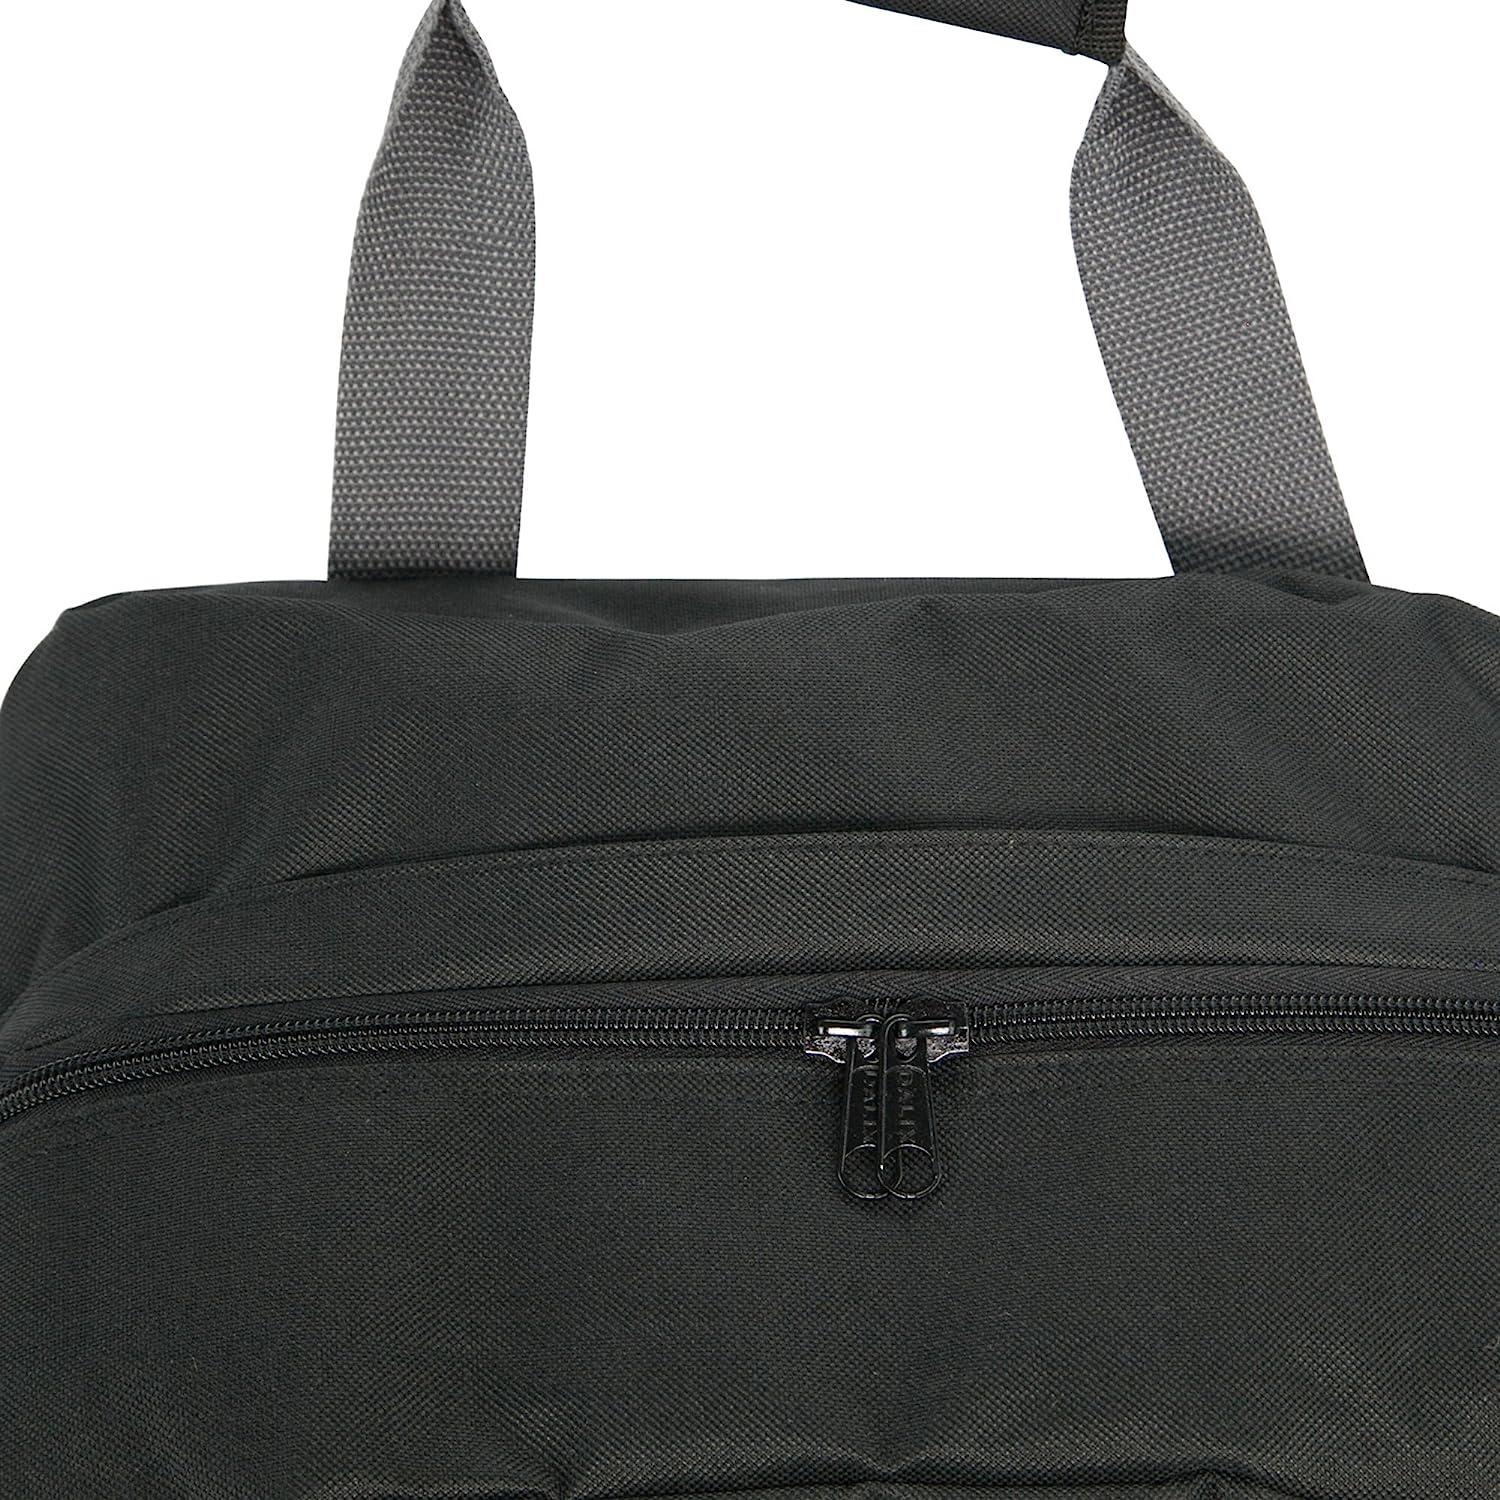  Dalix 14 Small Duffle Bag Two Toned Gym Travel Bag in Black